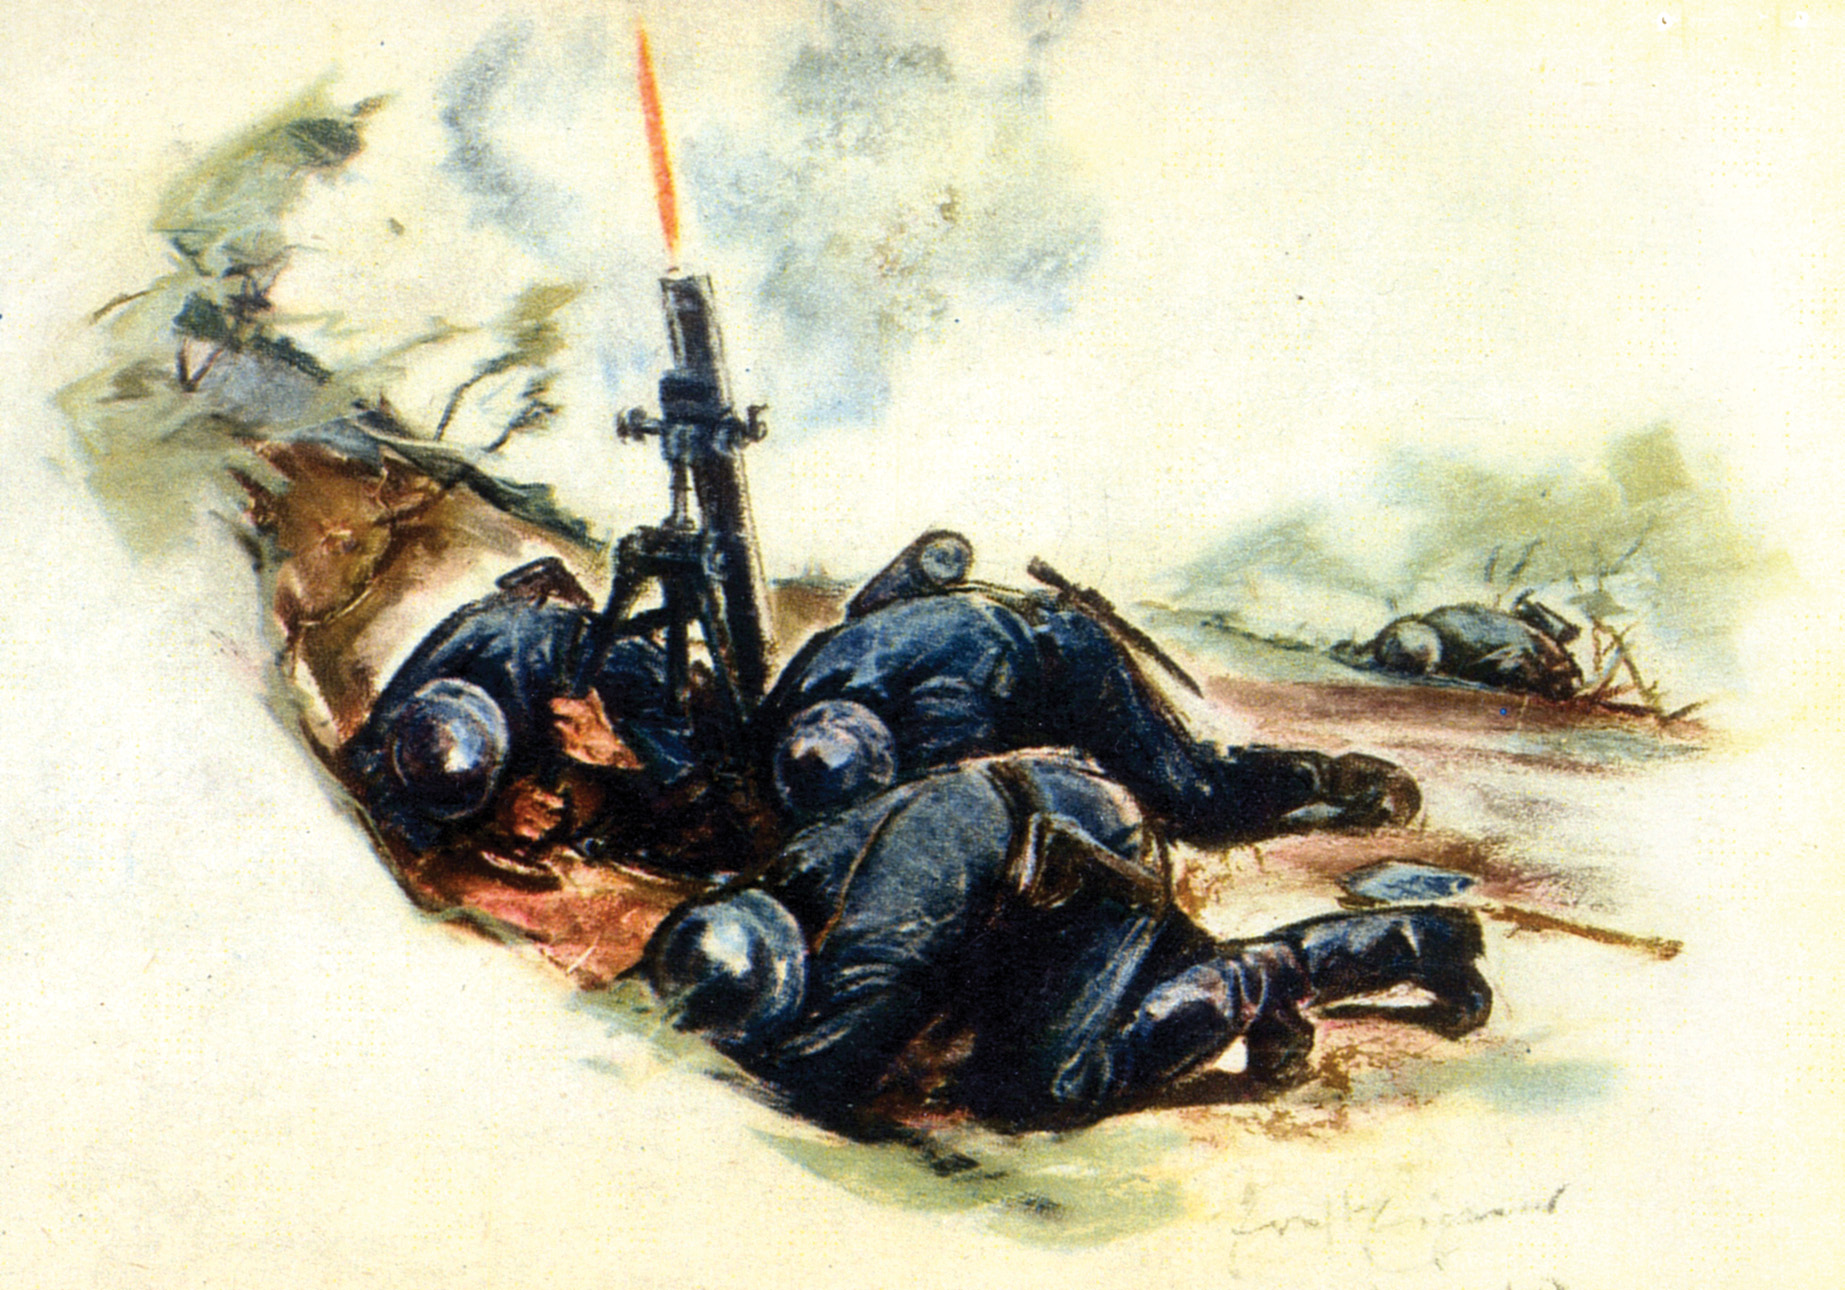 Eigener’s watercolor of a mortar crew firing their weapon.